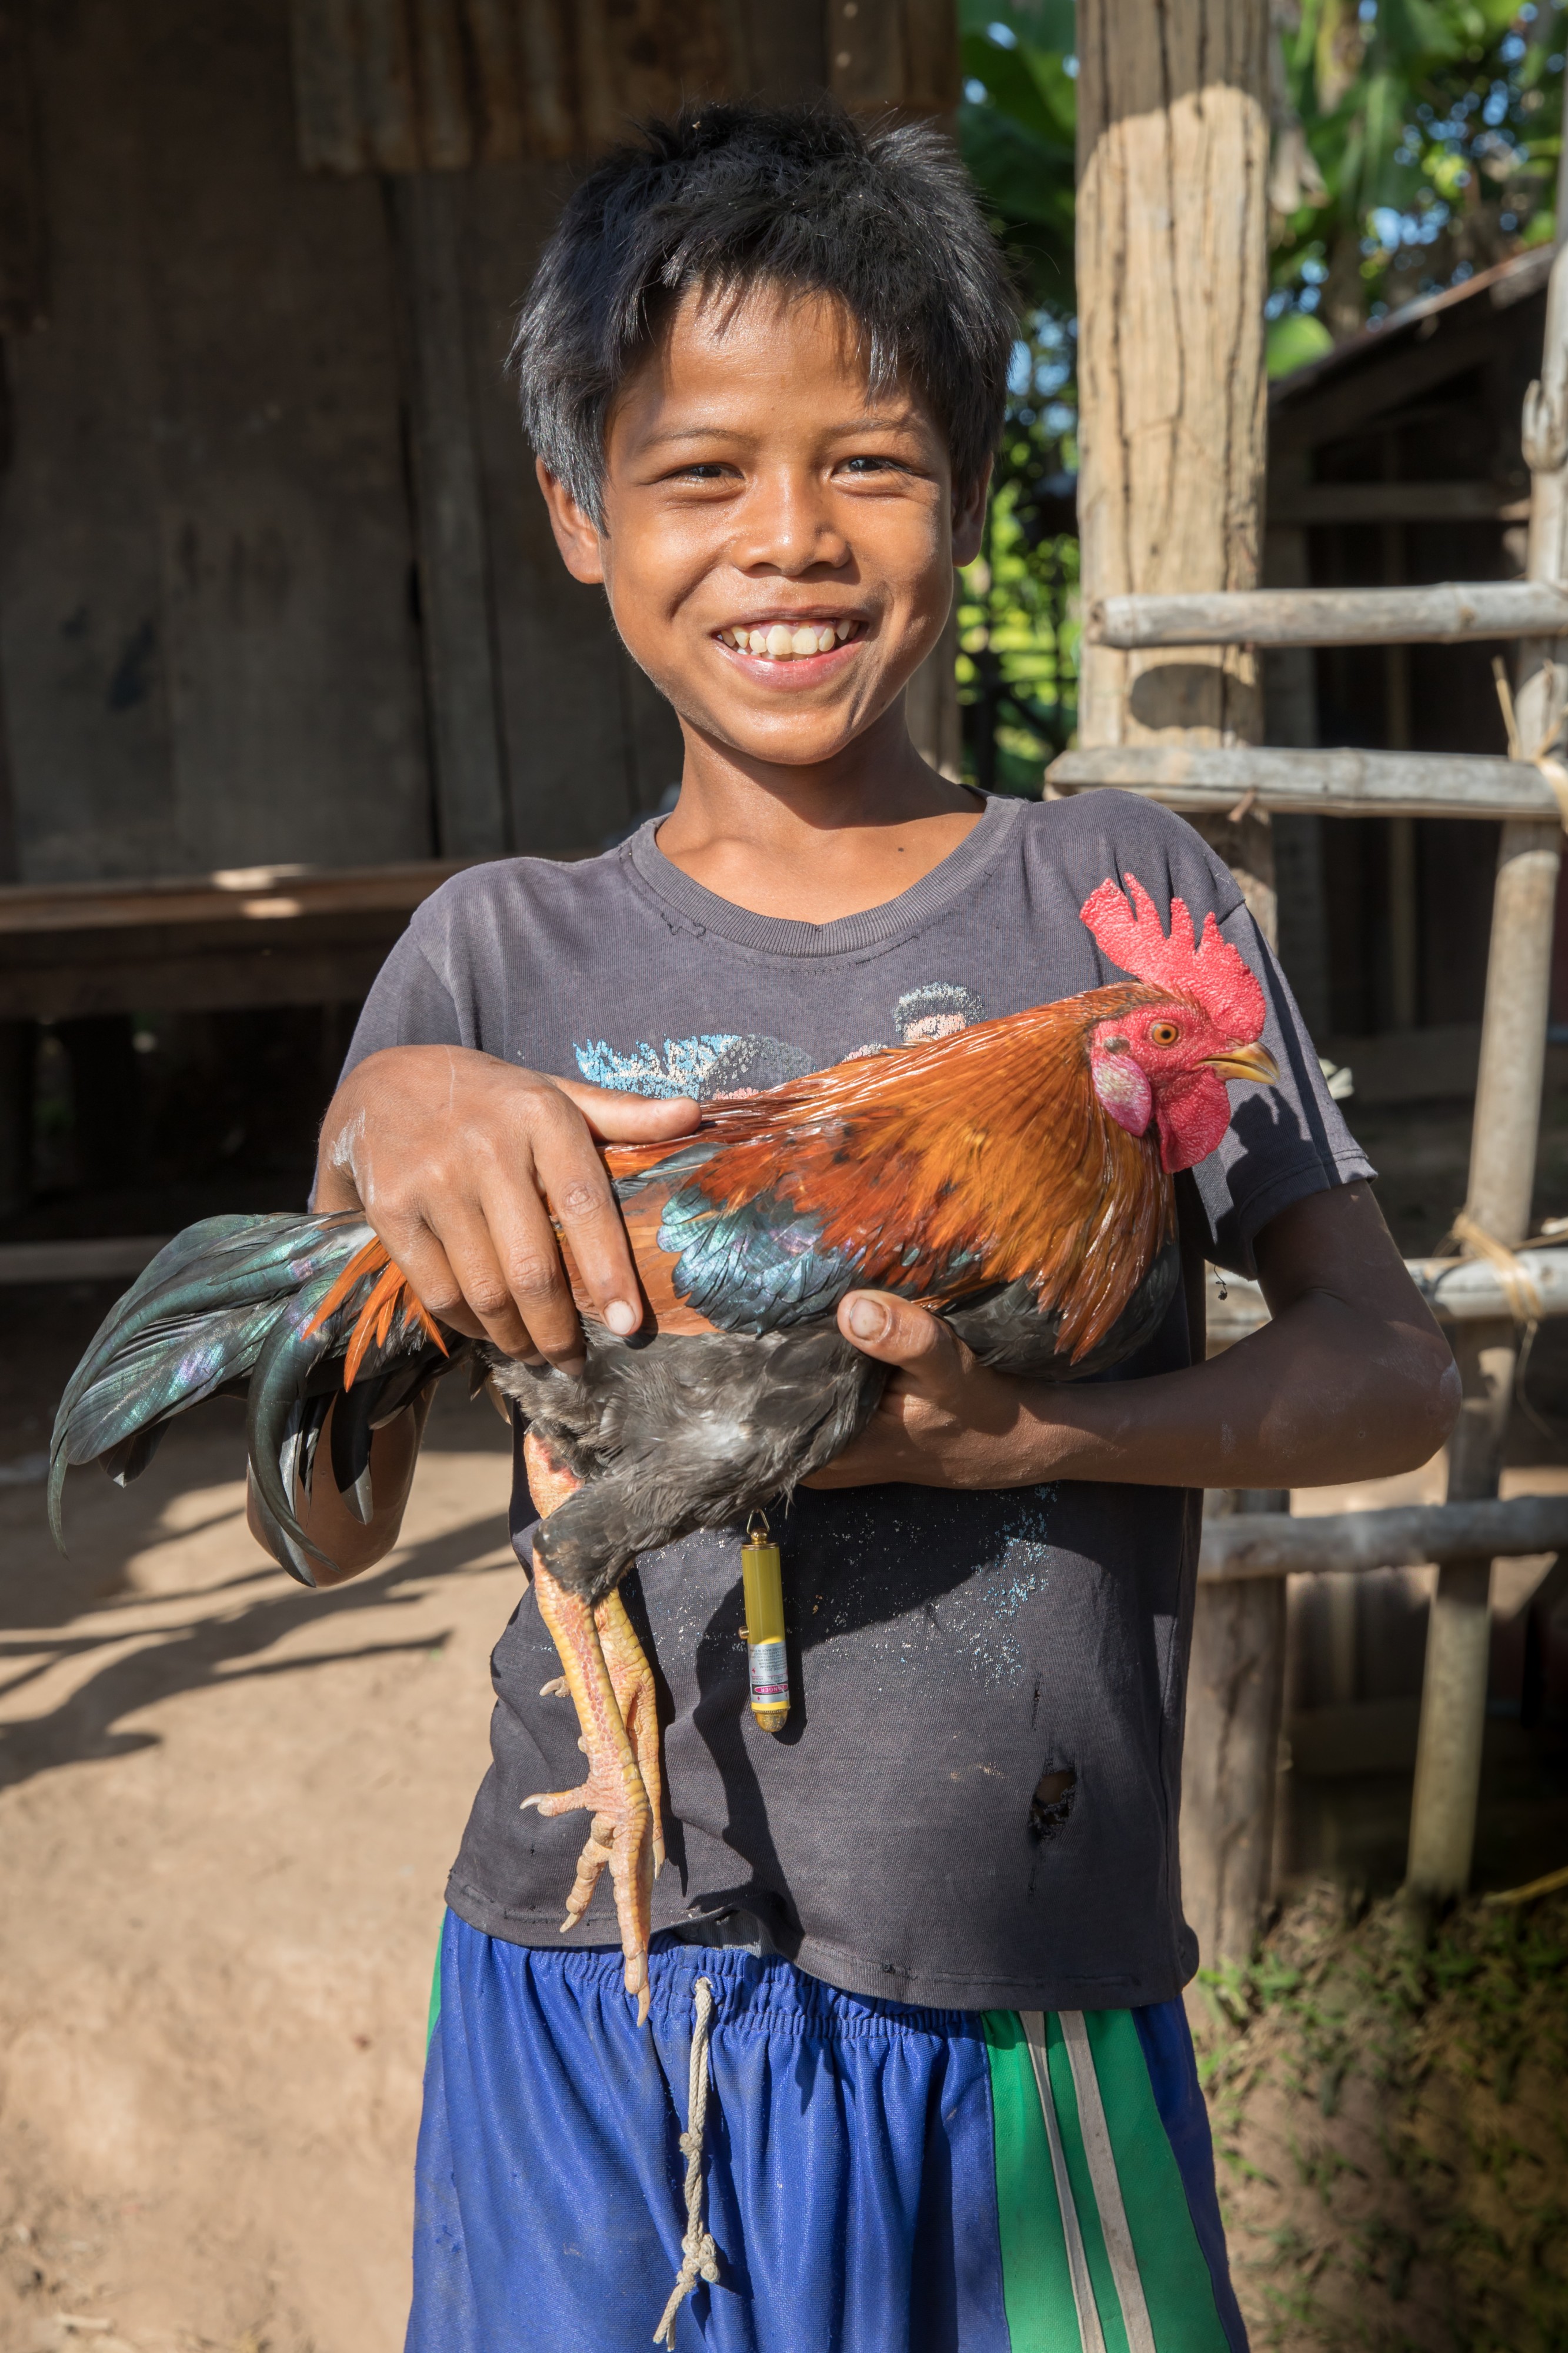 Young boy smiling, holding a fighting rooster in Laos